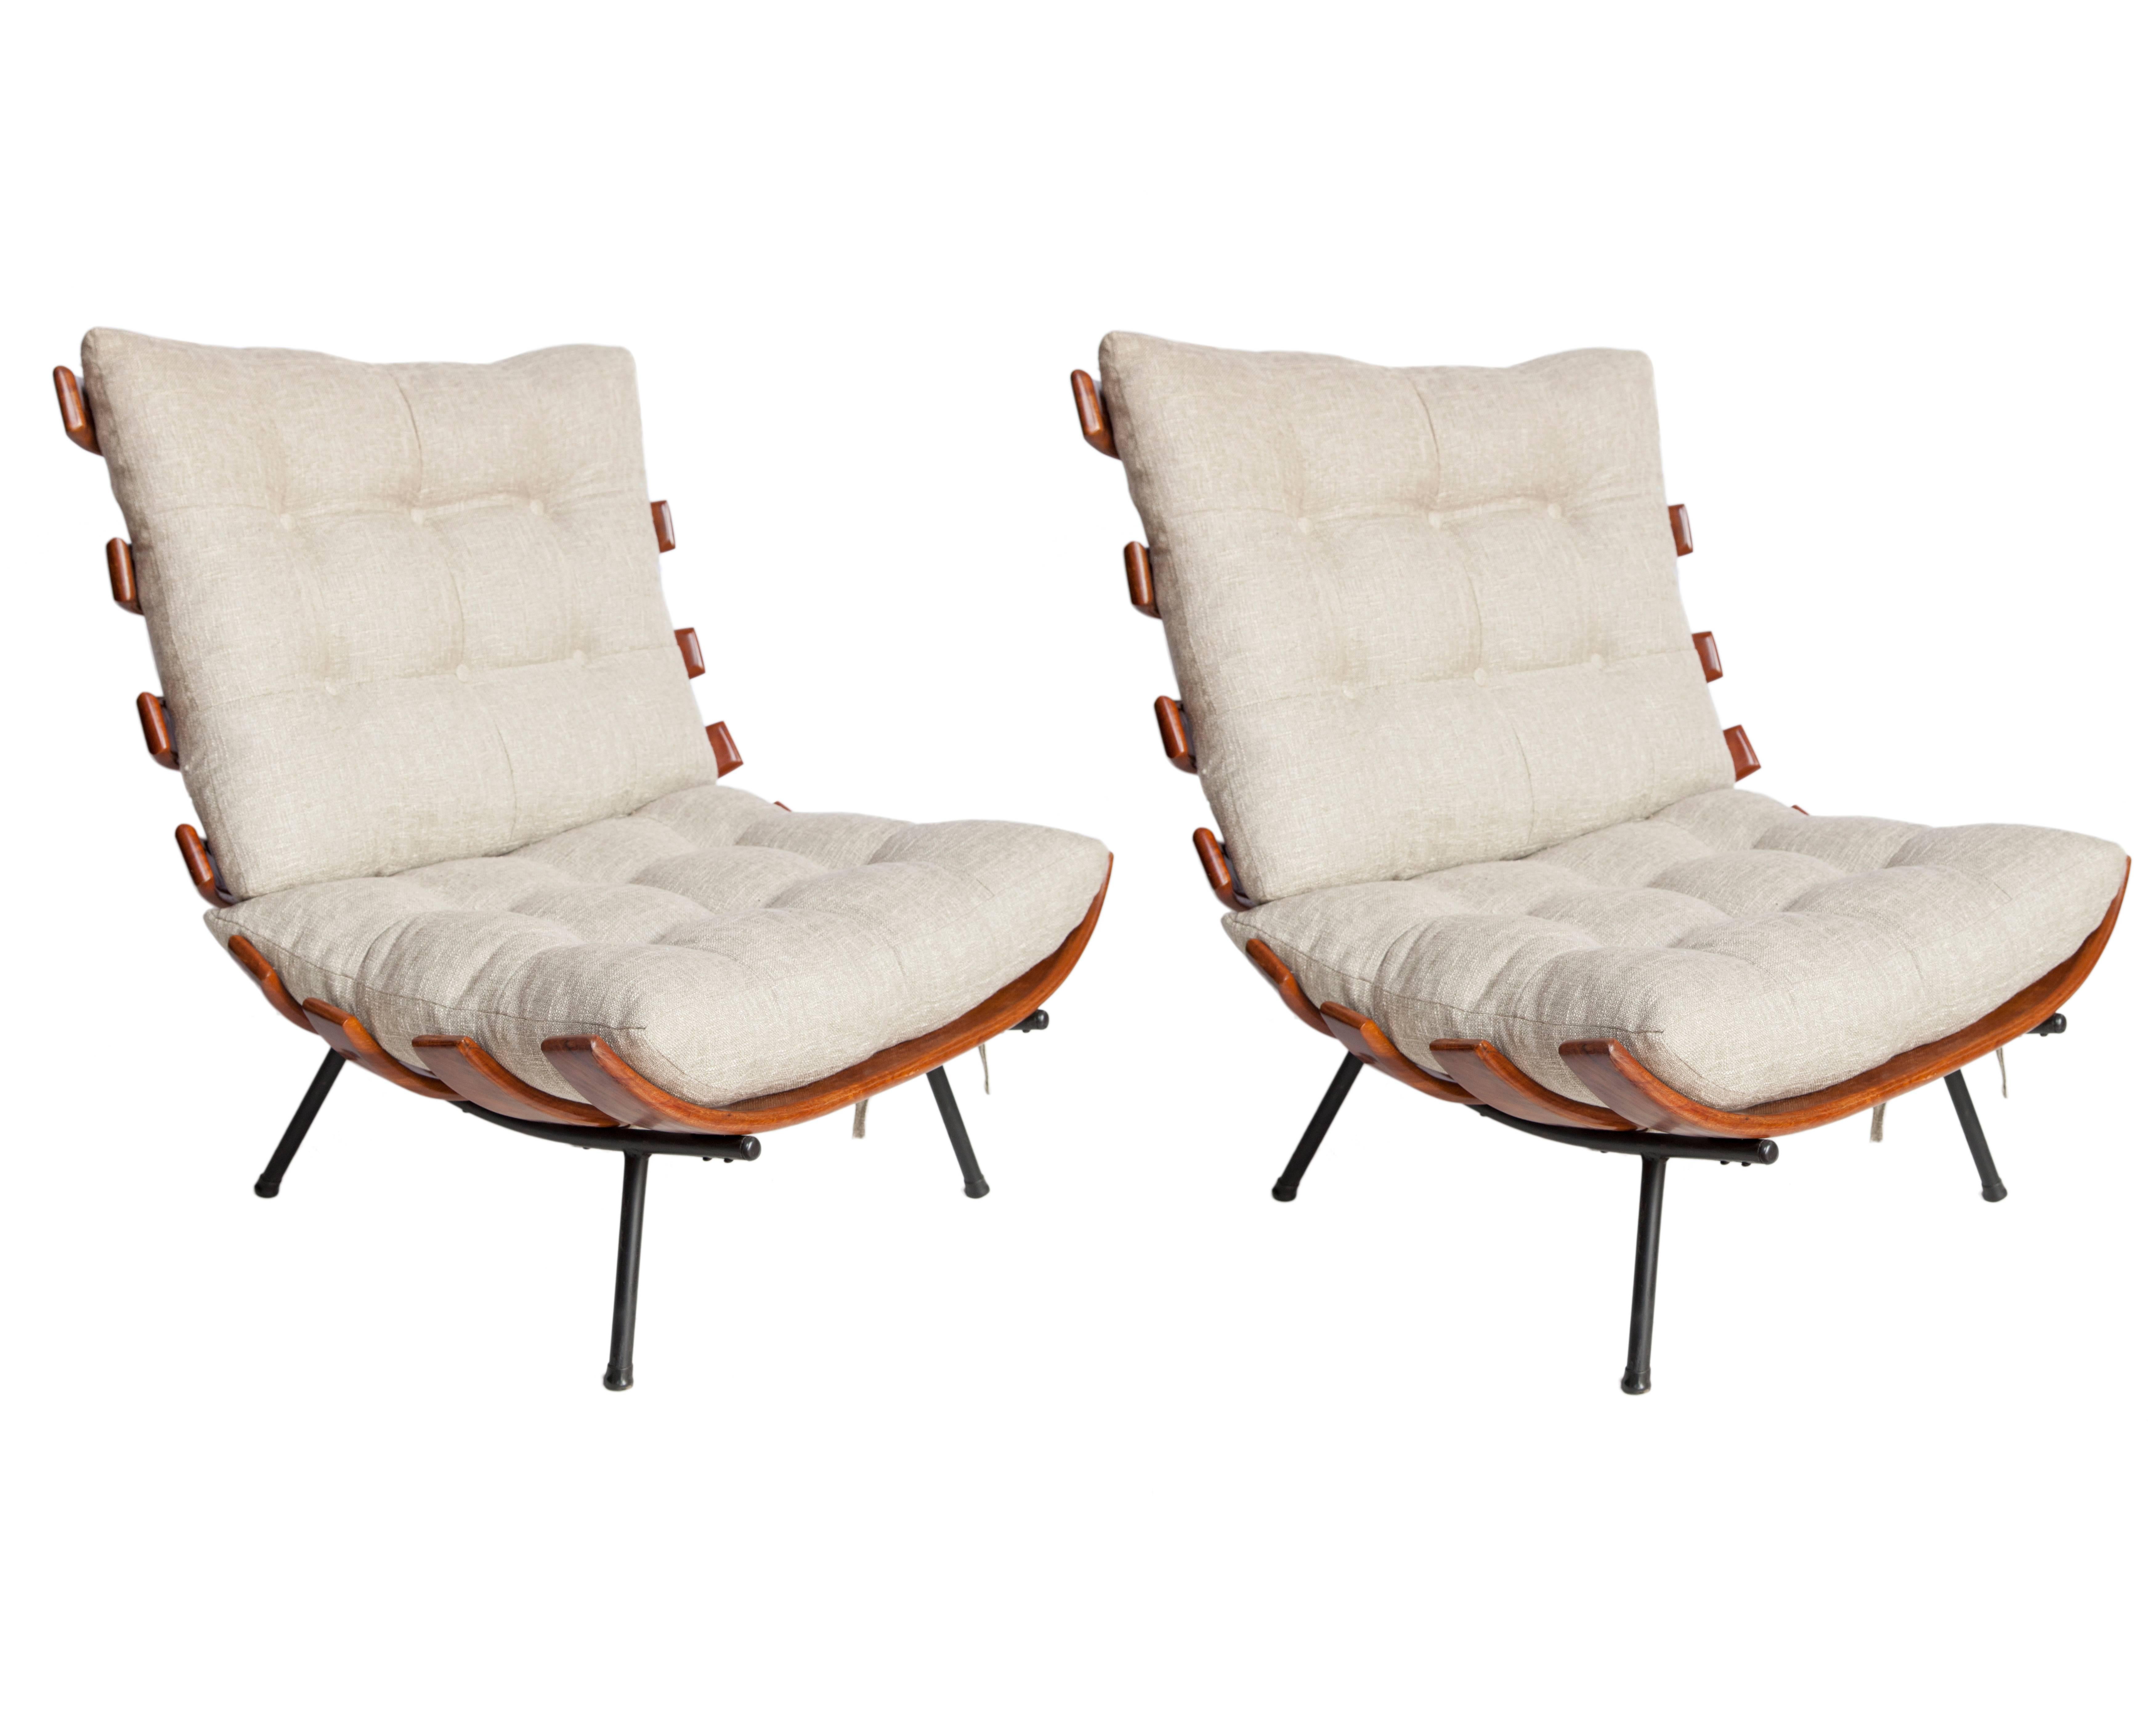 Brazilian Mid-Century Modern lounge chairs attributed to Martin Eisler. Crafted in caviuna wood with metal feet, circa 1950. This iconic design features a frame made up of curved slates with recently re-upholstered cushions in beige linen. The pair